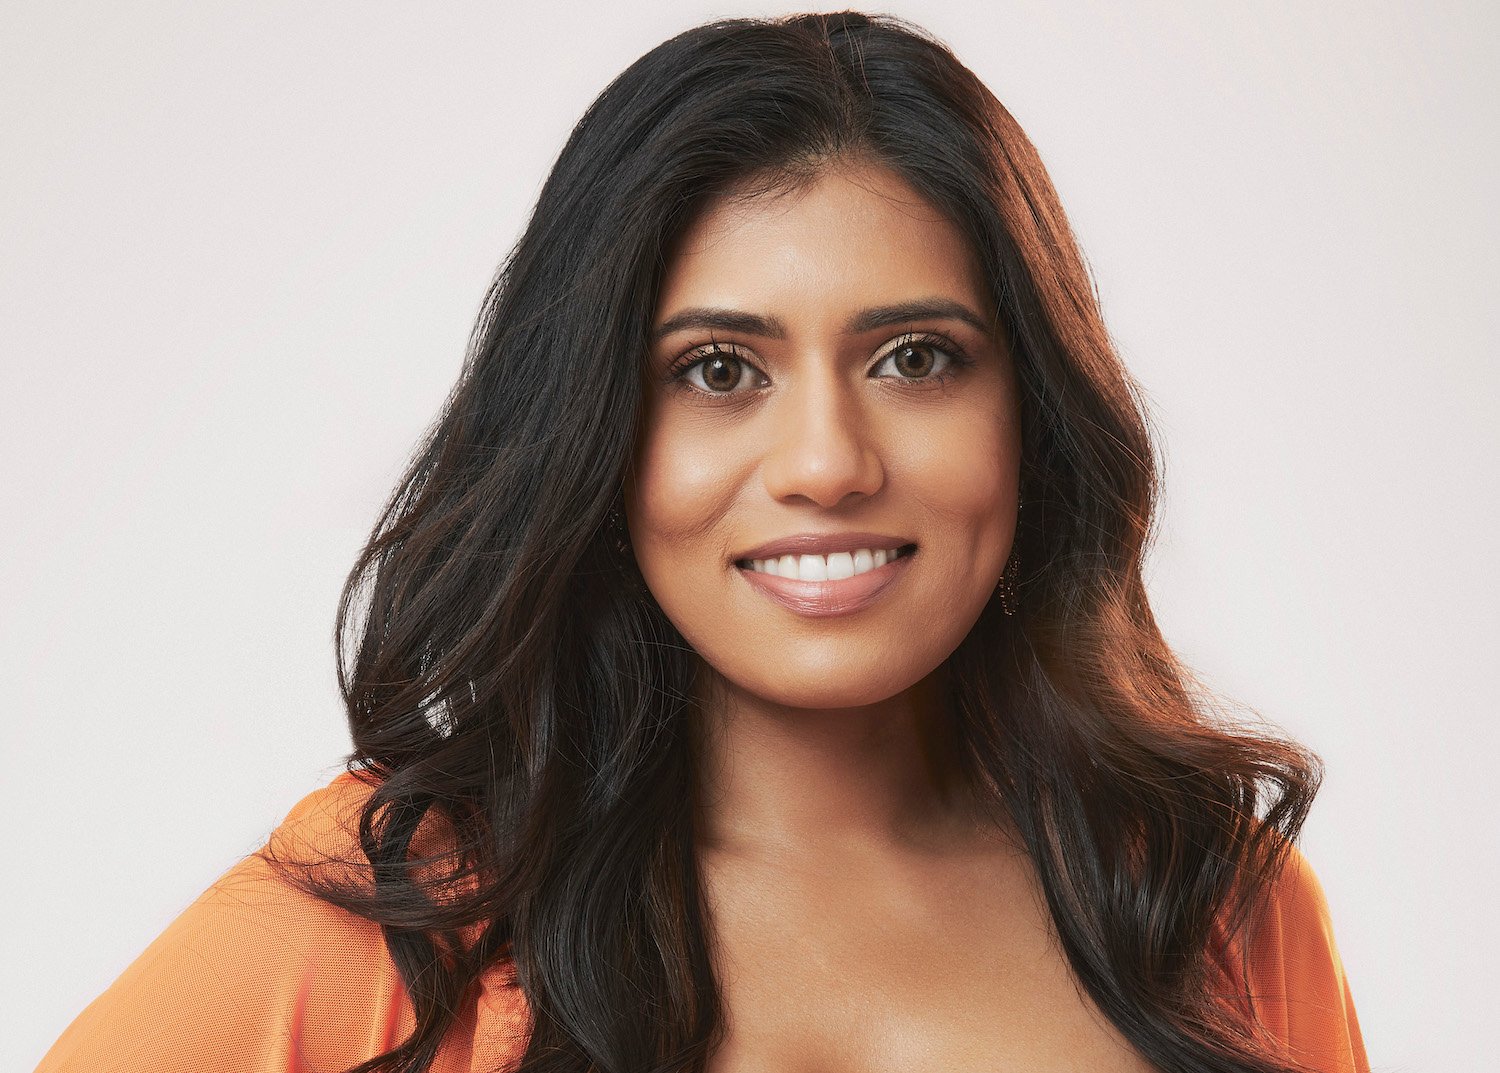 'The Bachelor' star Lekha Ravi wearing an orange dress in her official headshot for the series.